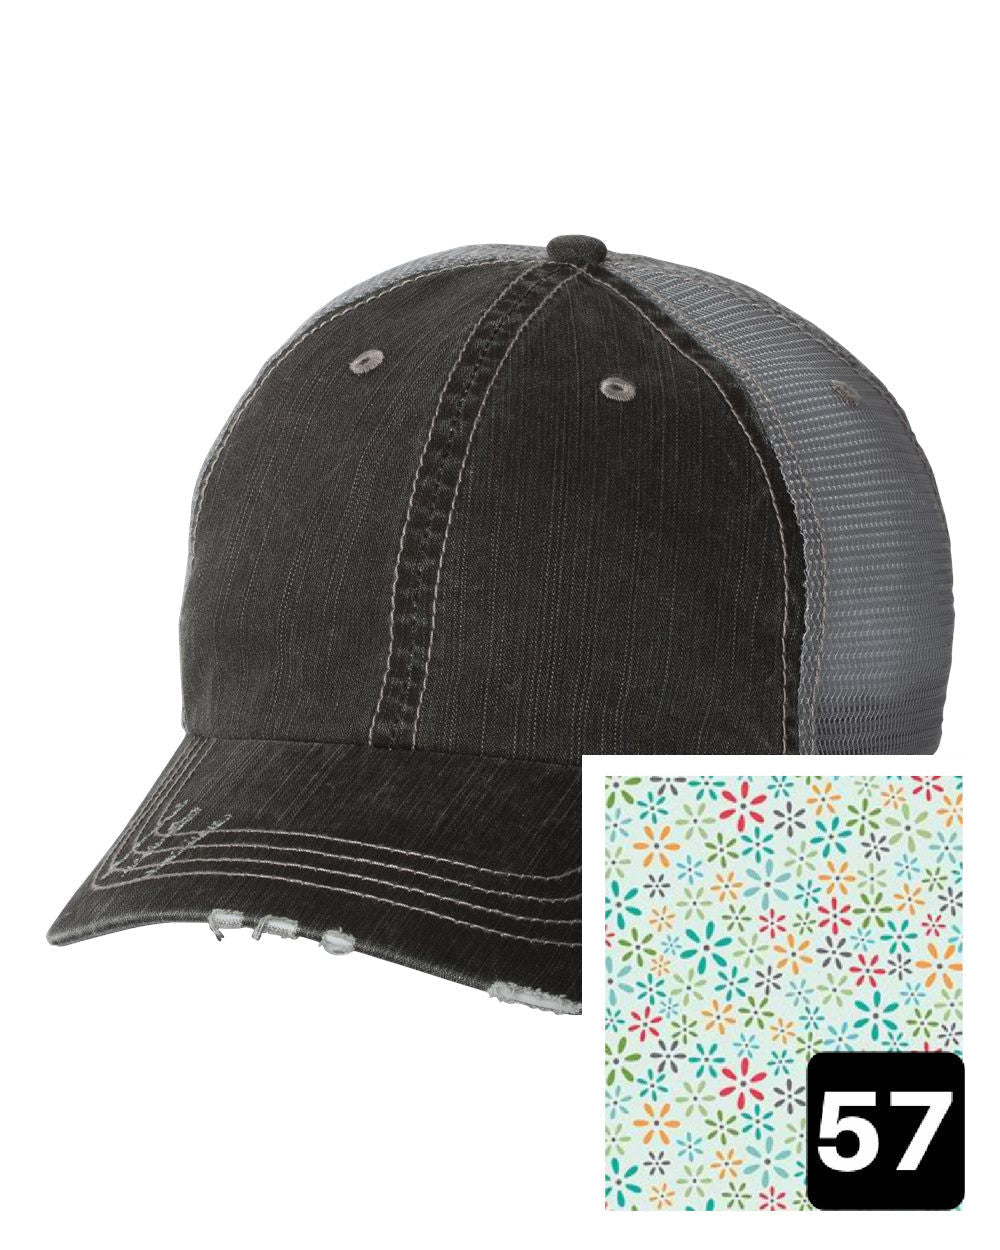 gray distressed trucker hat with white daisy on yellow fabric state of Florida